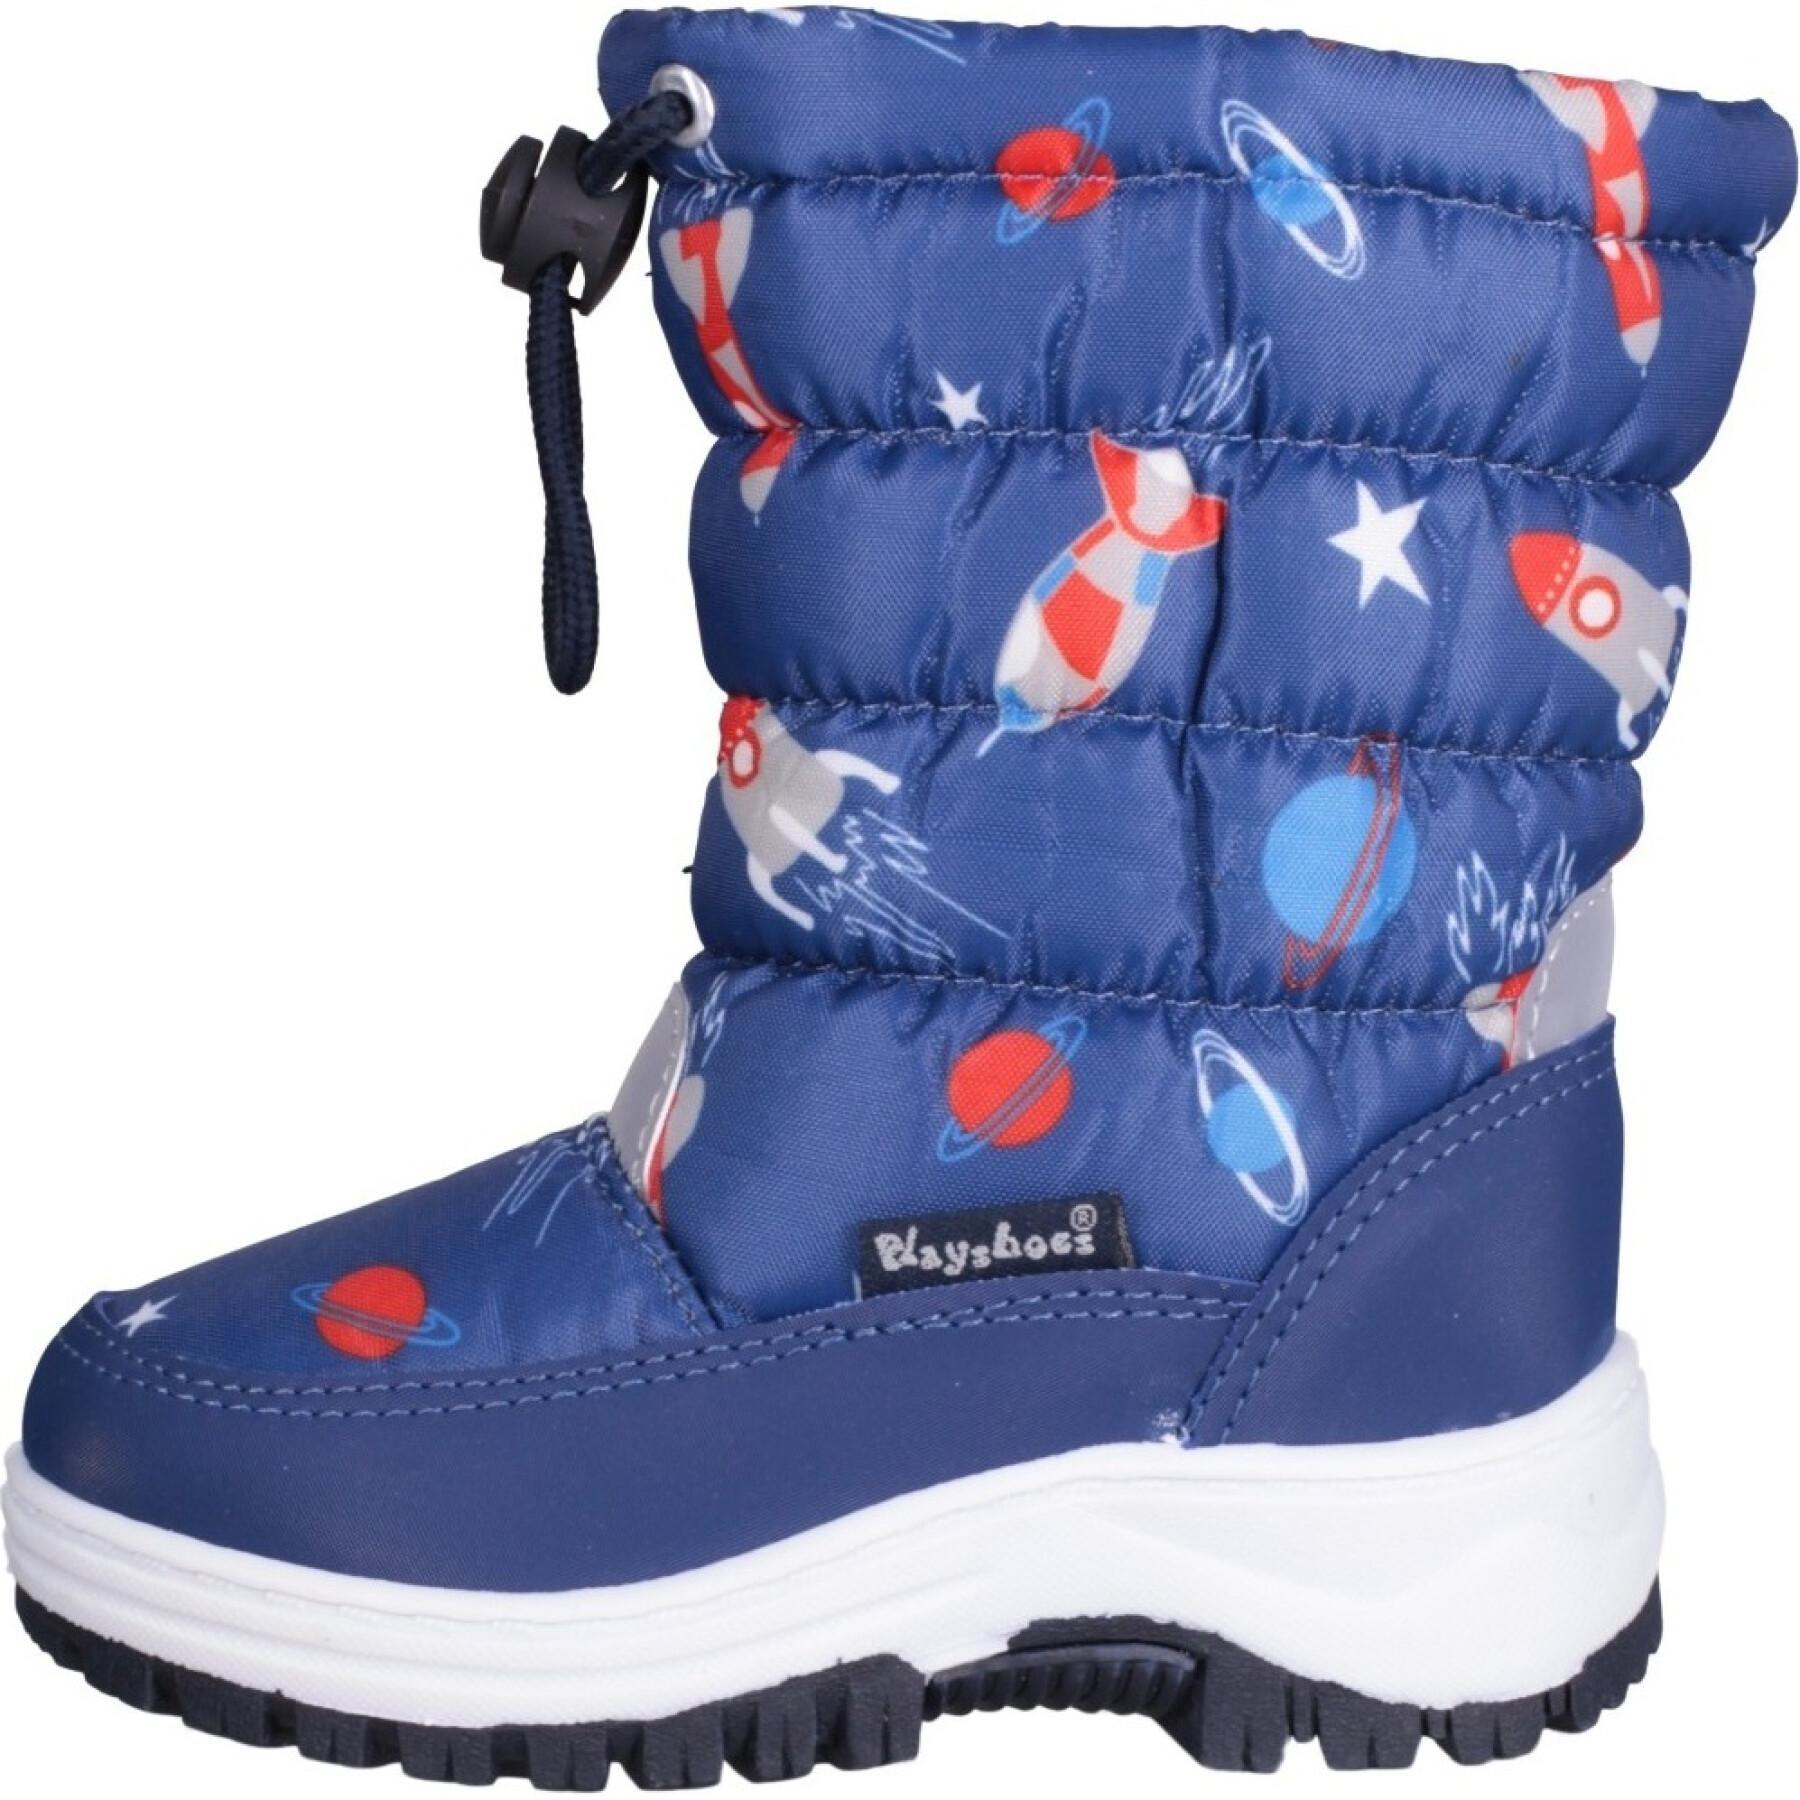 Children's winter boots Playshoes Outer Space